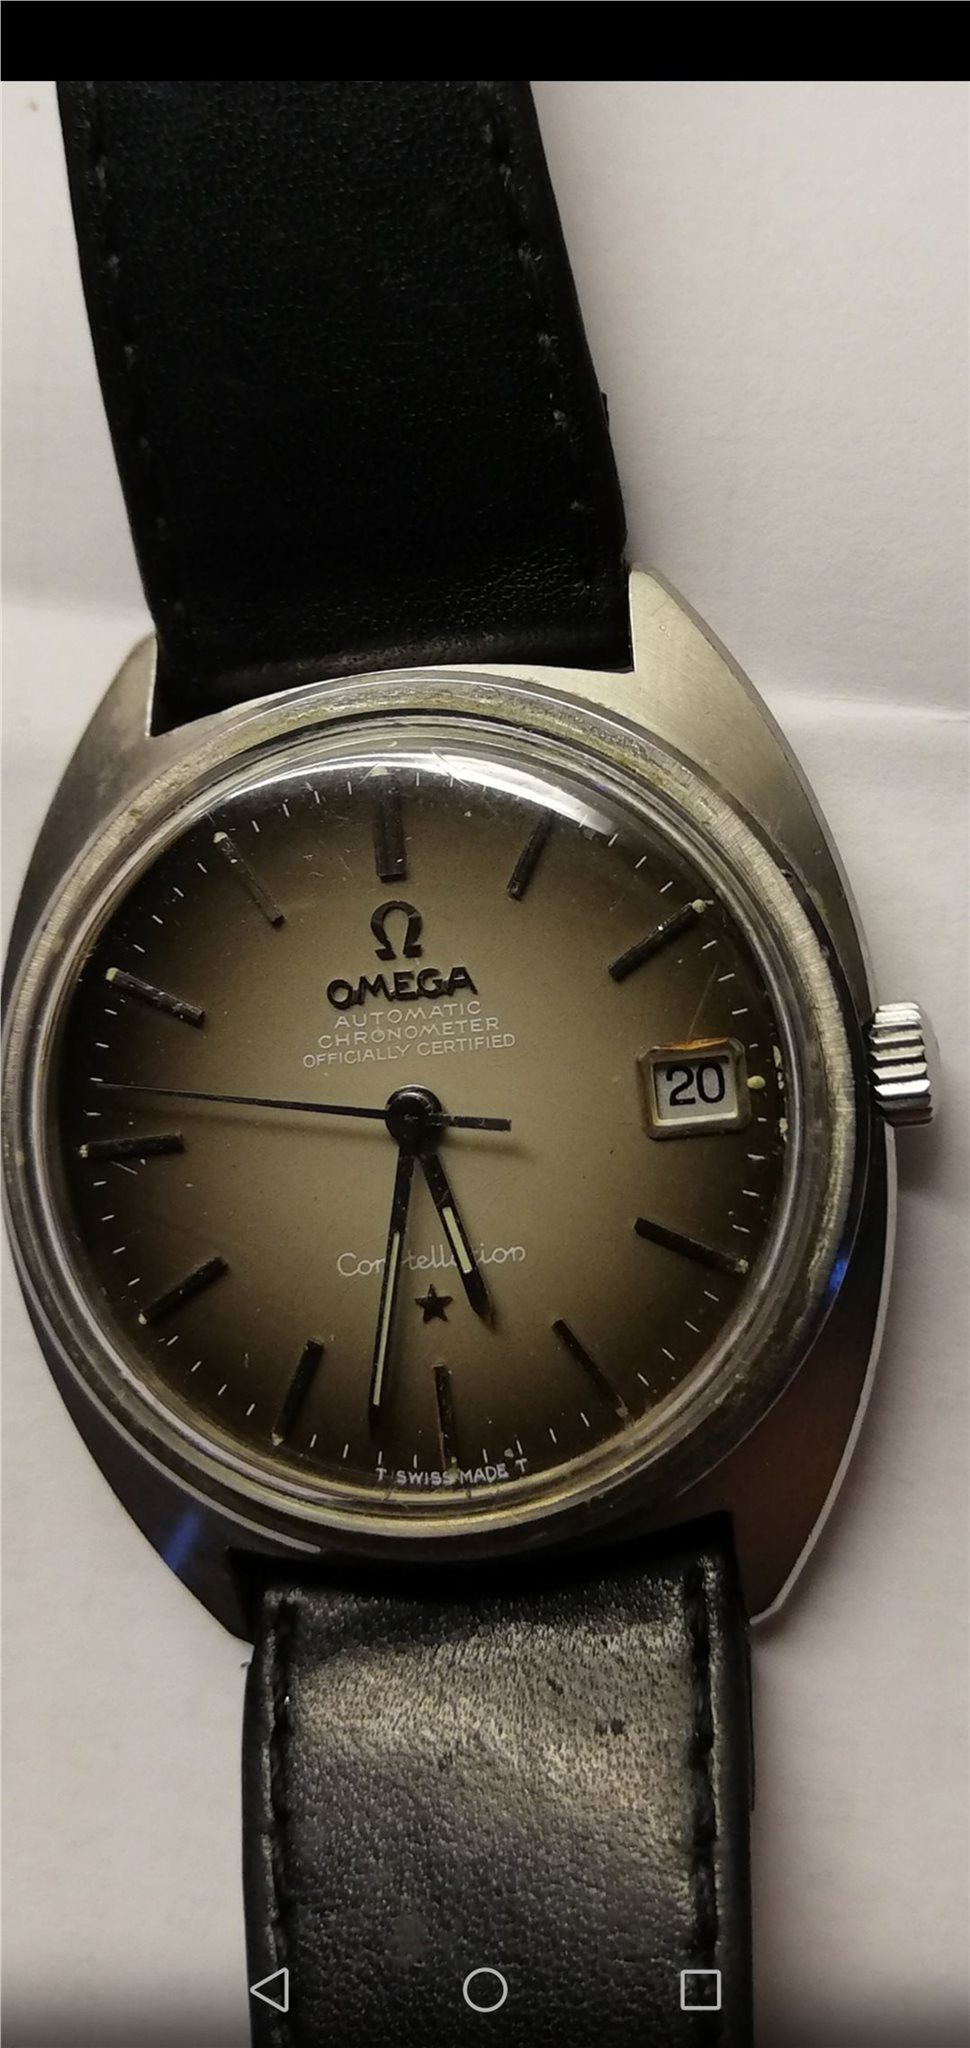 What Omega did you buy for under $500 